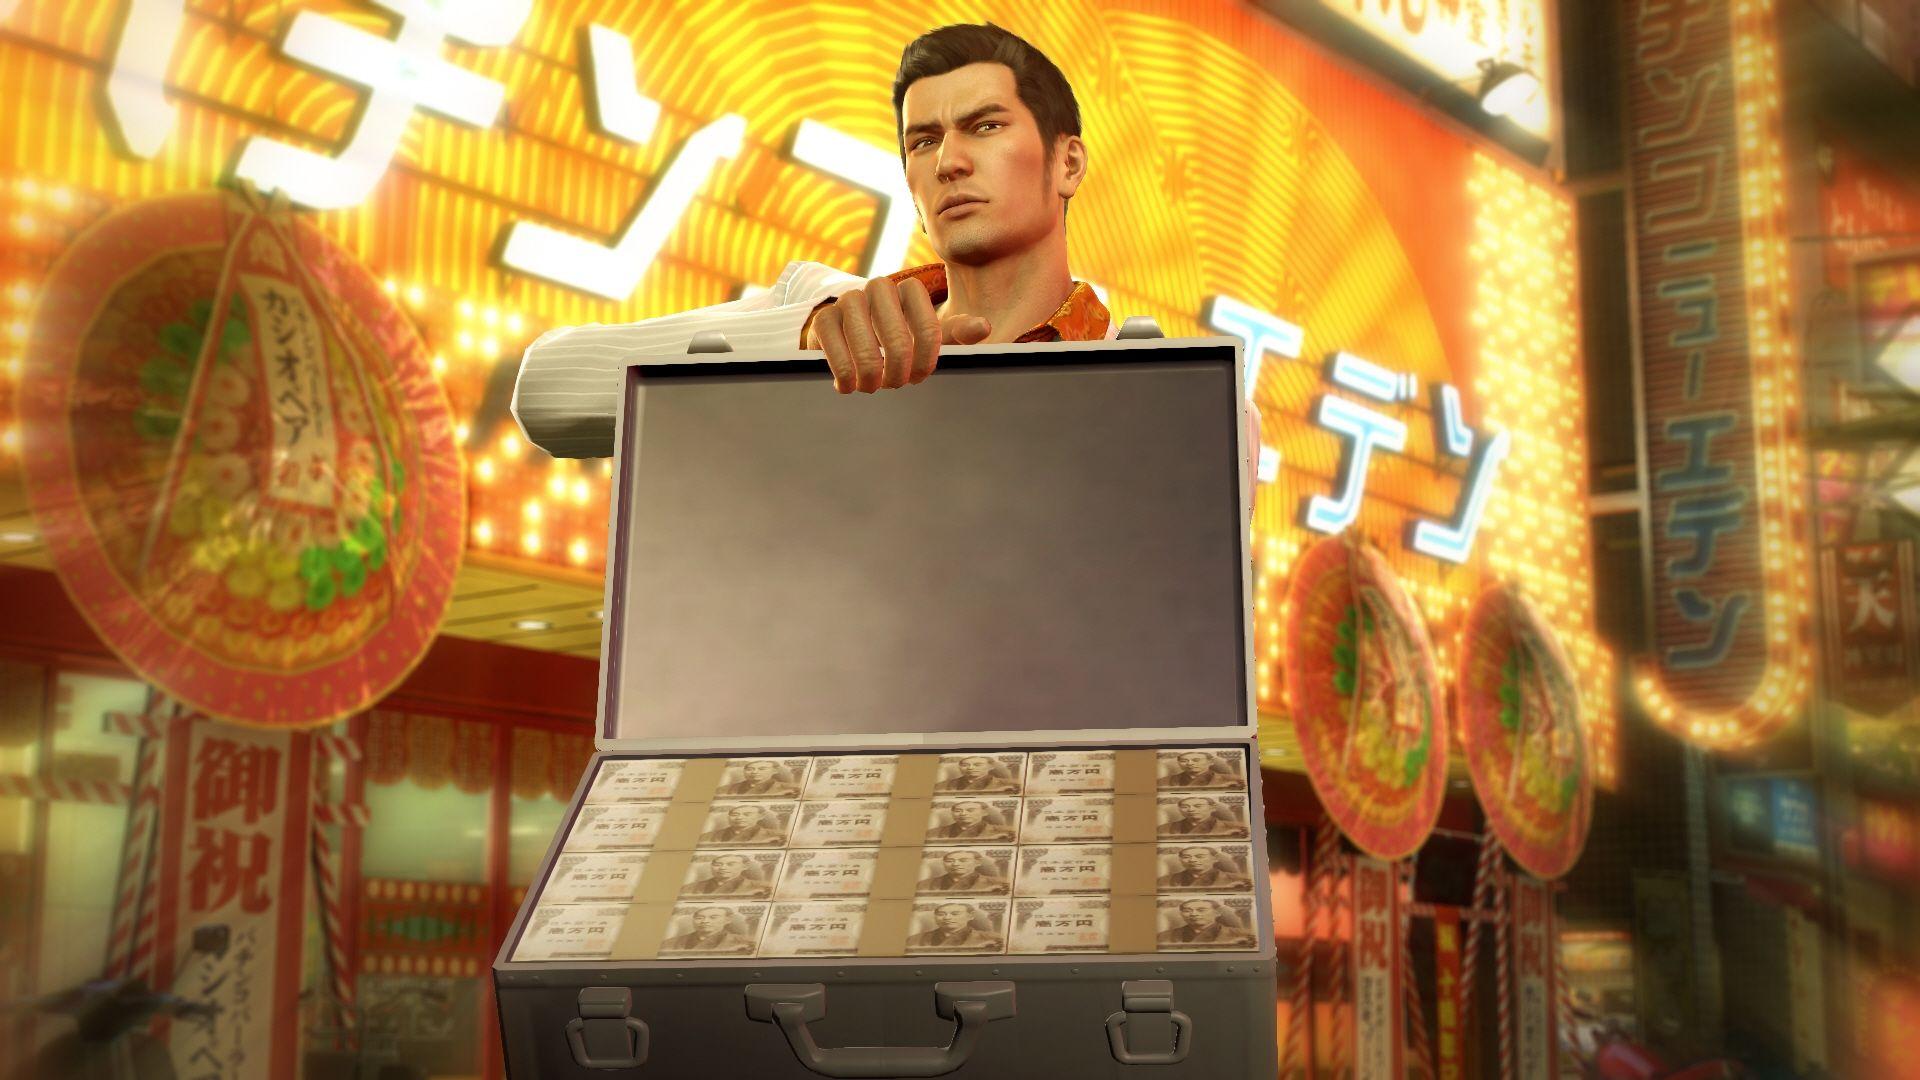 Explore the criminal underbelly of '80s Tokyo in Yakuza out today